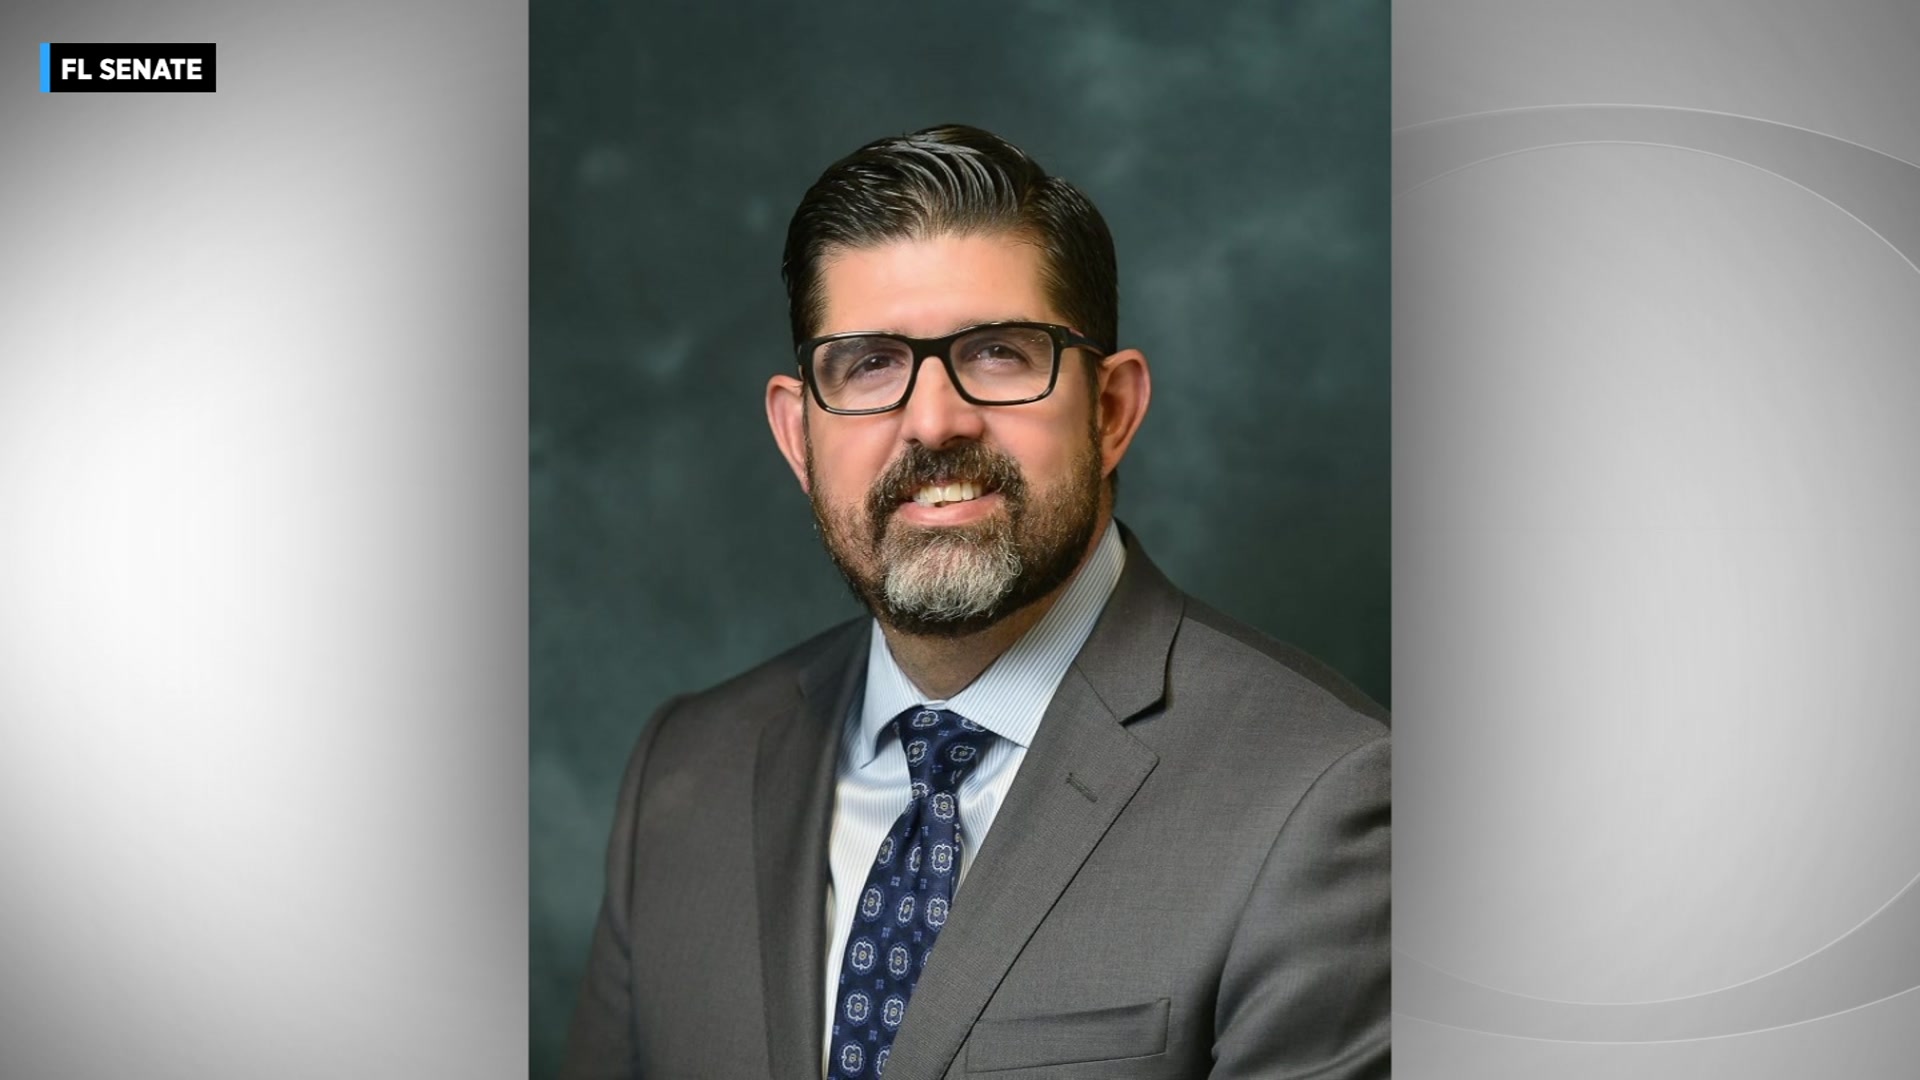 State Board Of Education Unanimously Approves Sen. Manny Diaz Jr. For Education Commissioner